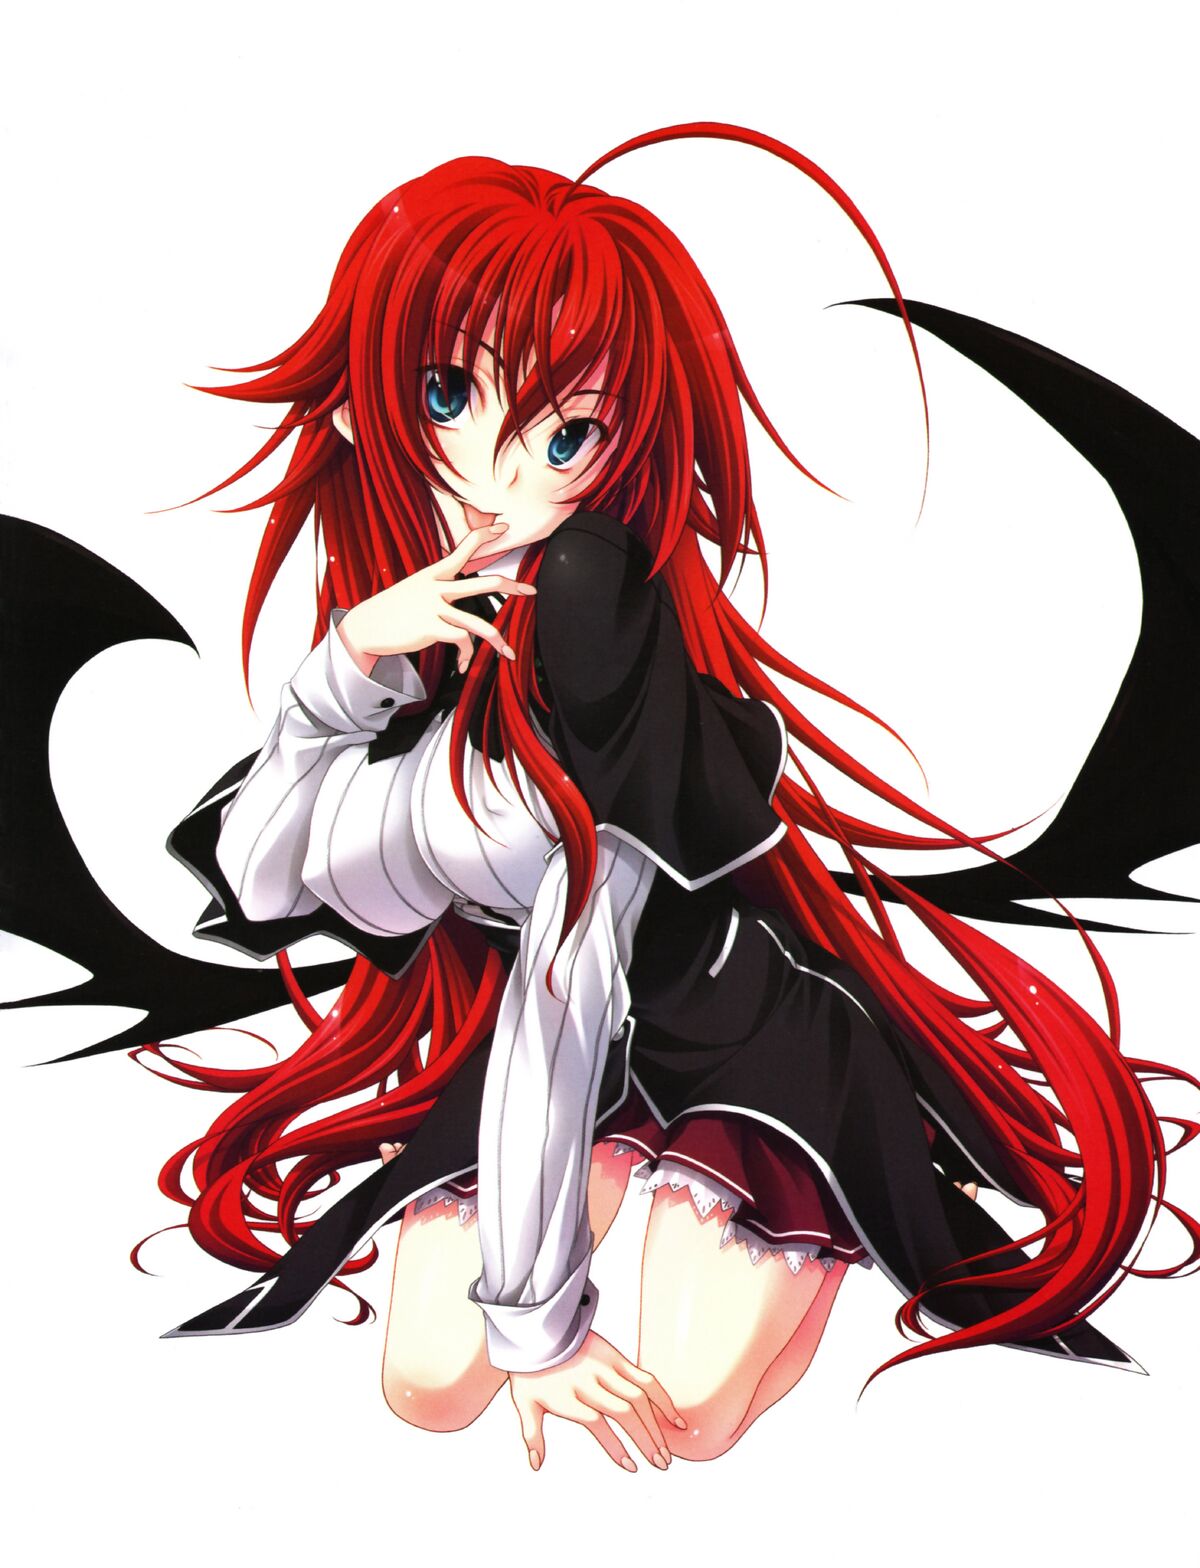 Who animated the new High School DxD Season 4? I'd really like to